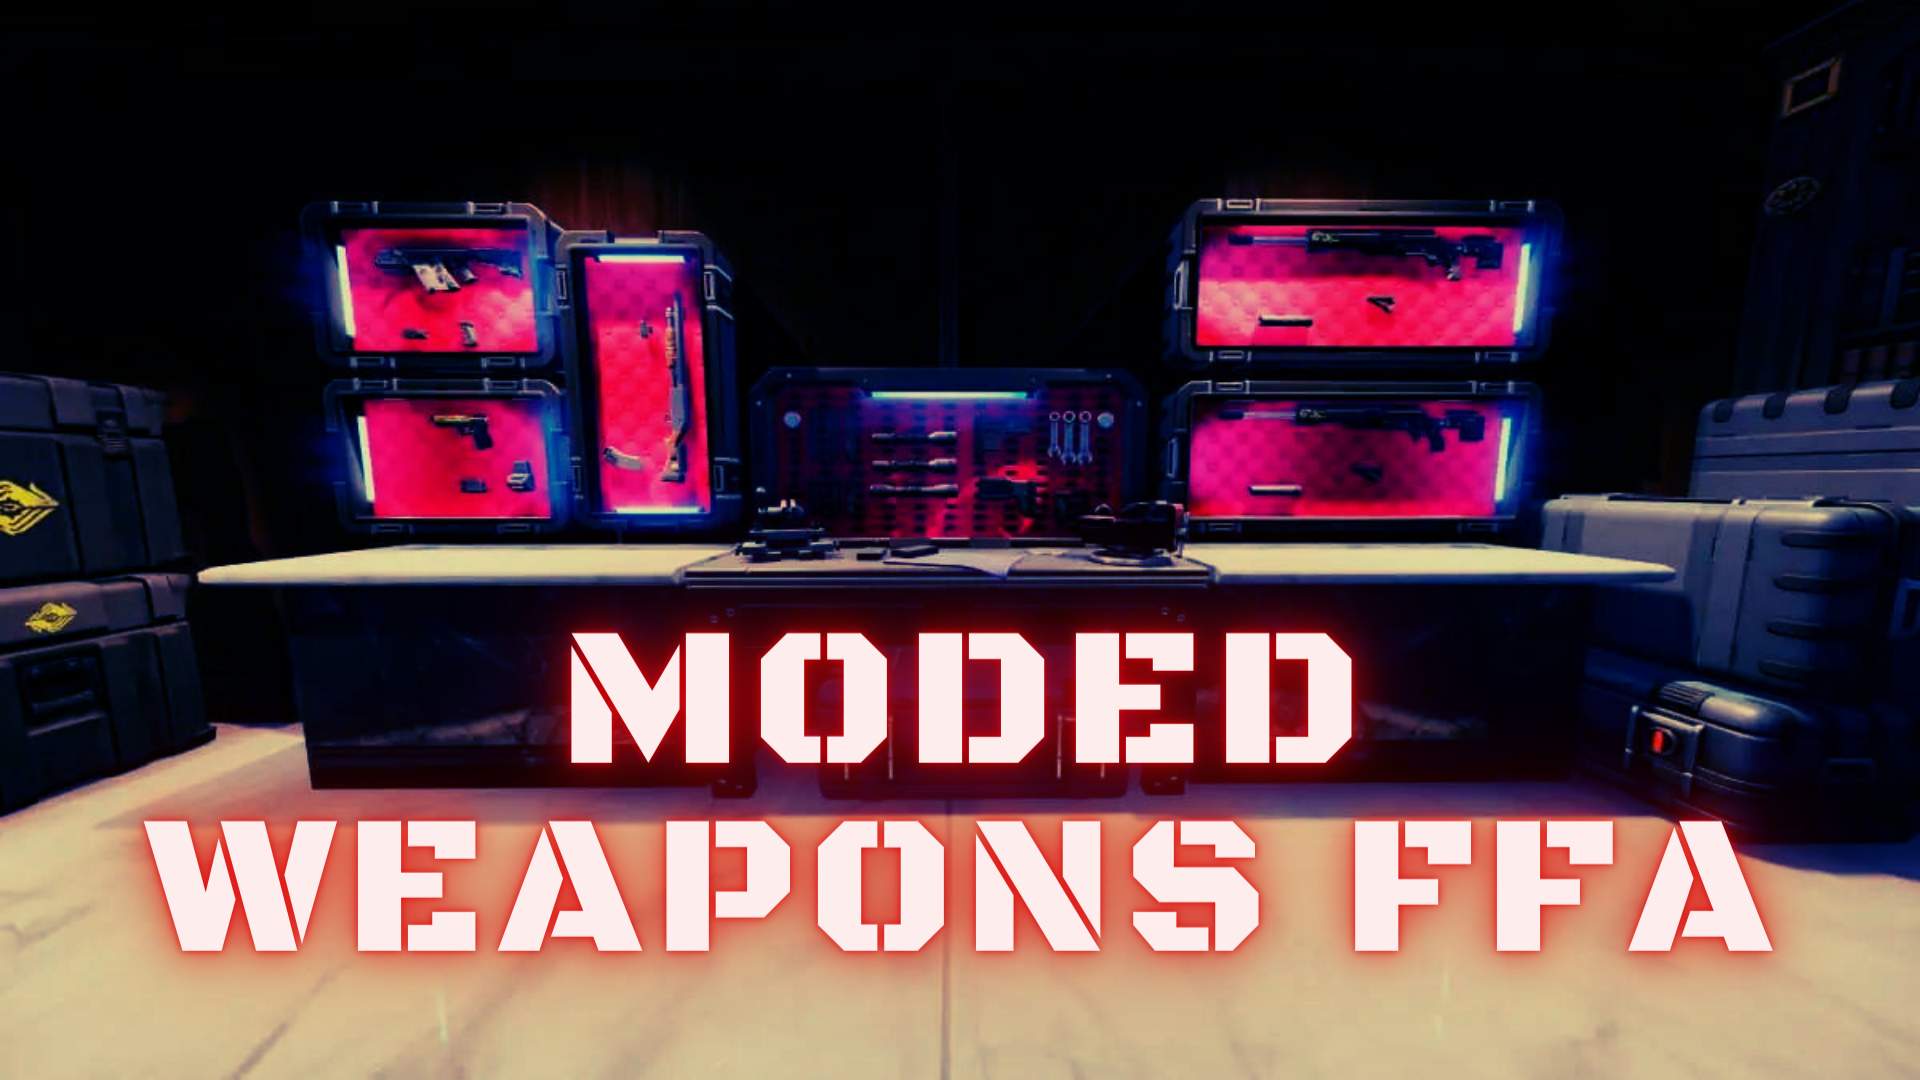 MODED WEAPONS FFA